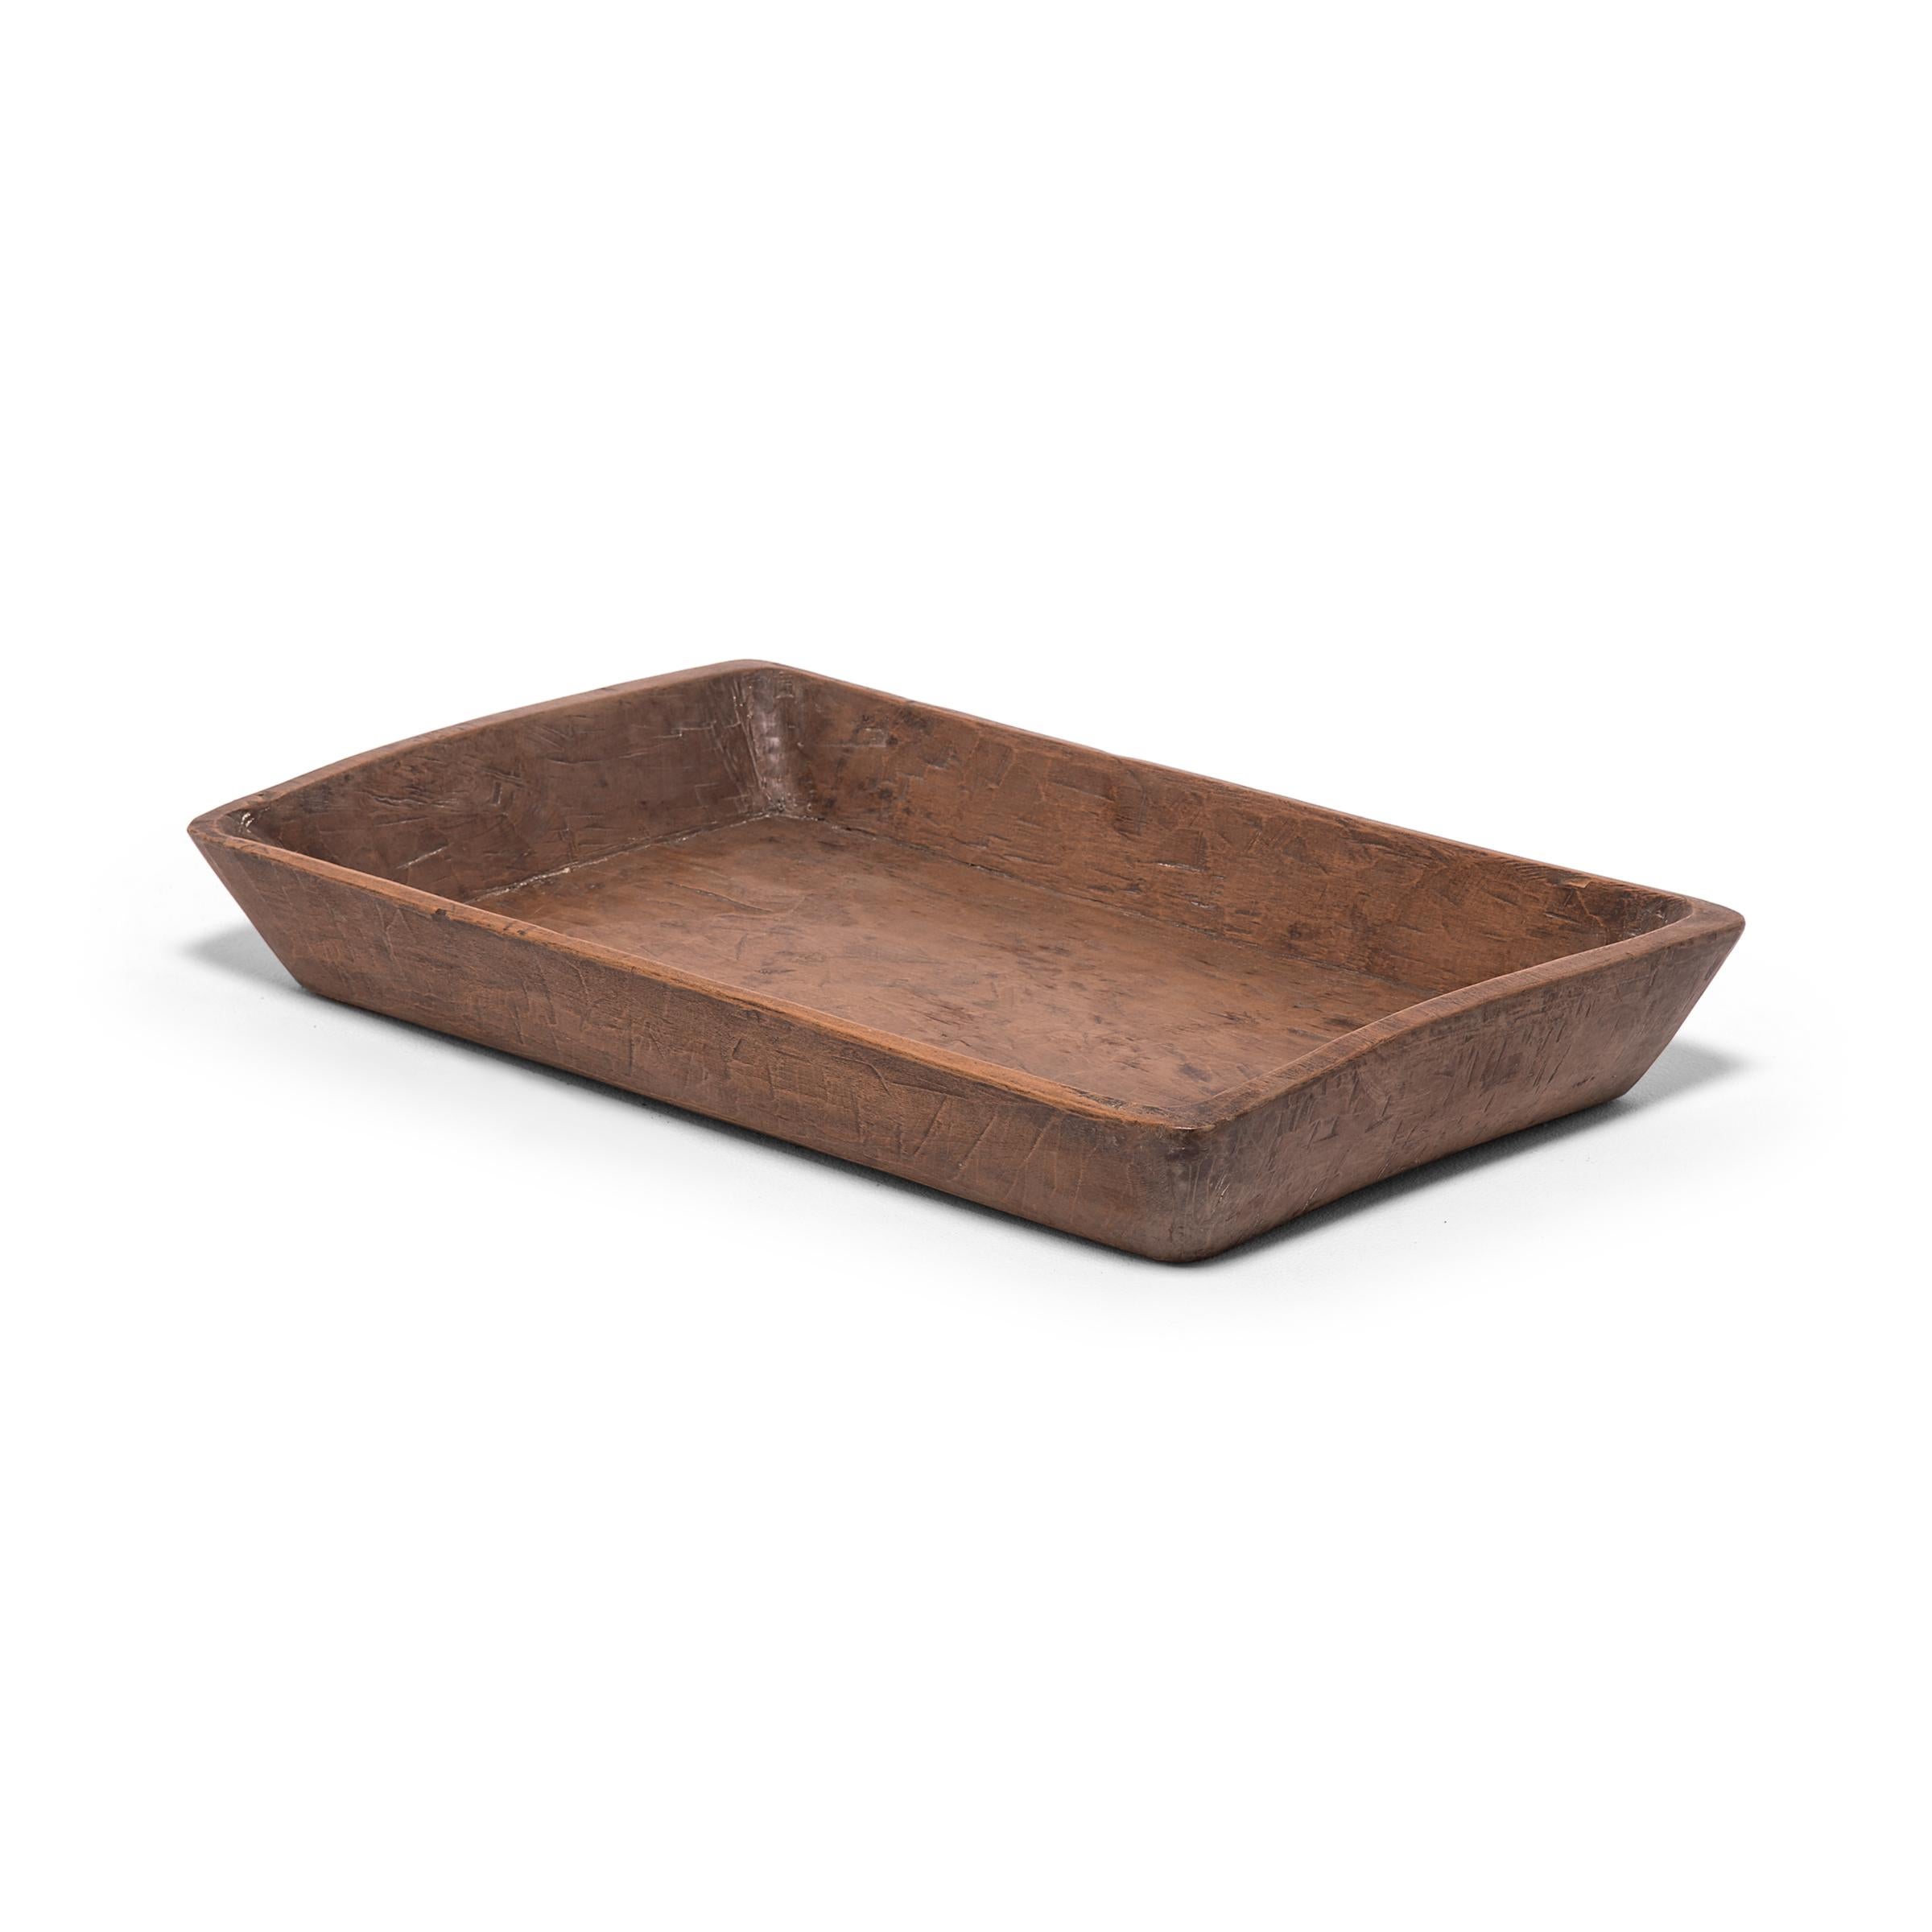 Carved from pine, this hundred-year-old tray made in northern China charms with its rusticity and simple shape. Marked with use and distinguished by the natural grain and knots of wood, the tray brings its timeless appeal to modern interiors as a